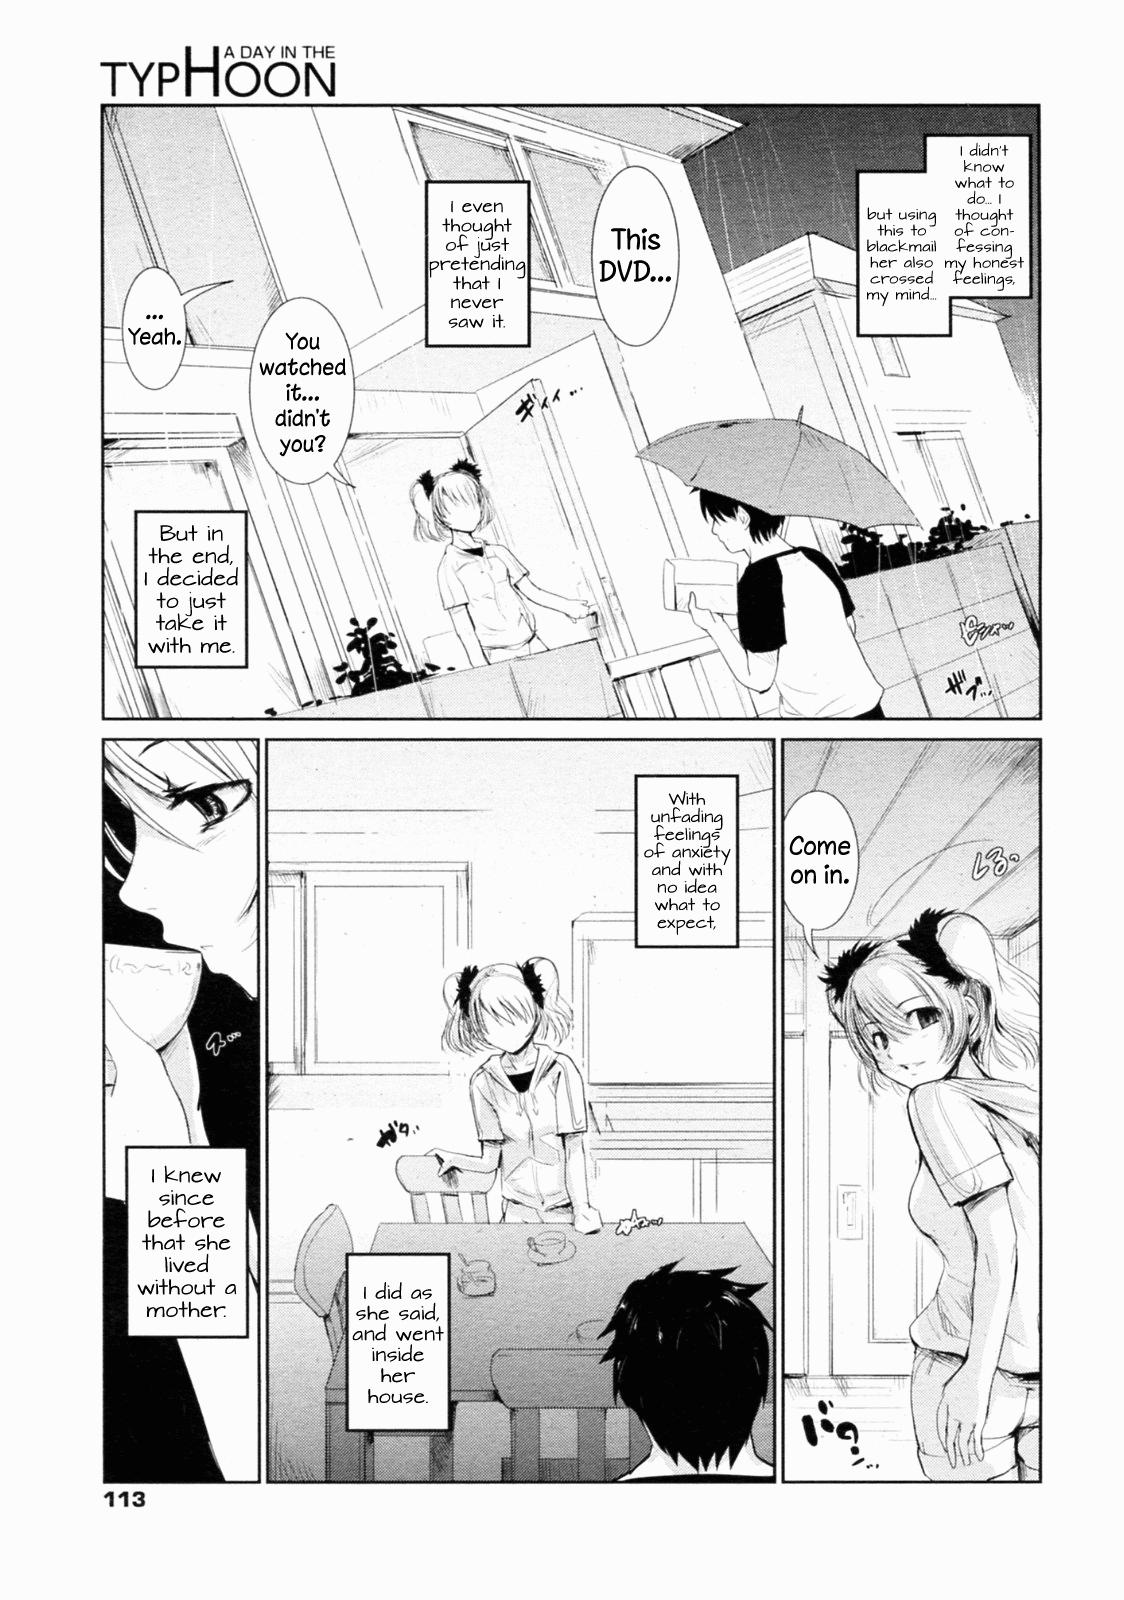 Safada A Day in the Typhoon Stepdad - Page 3